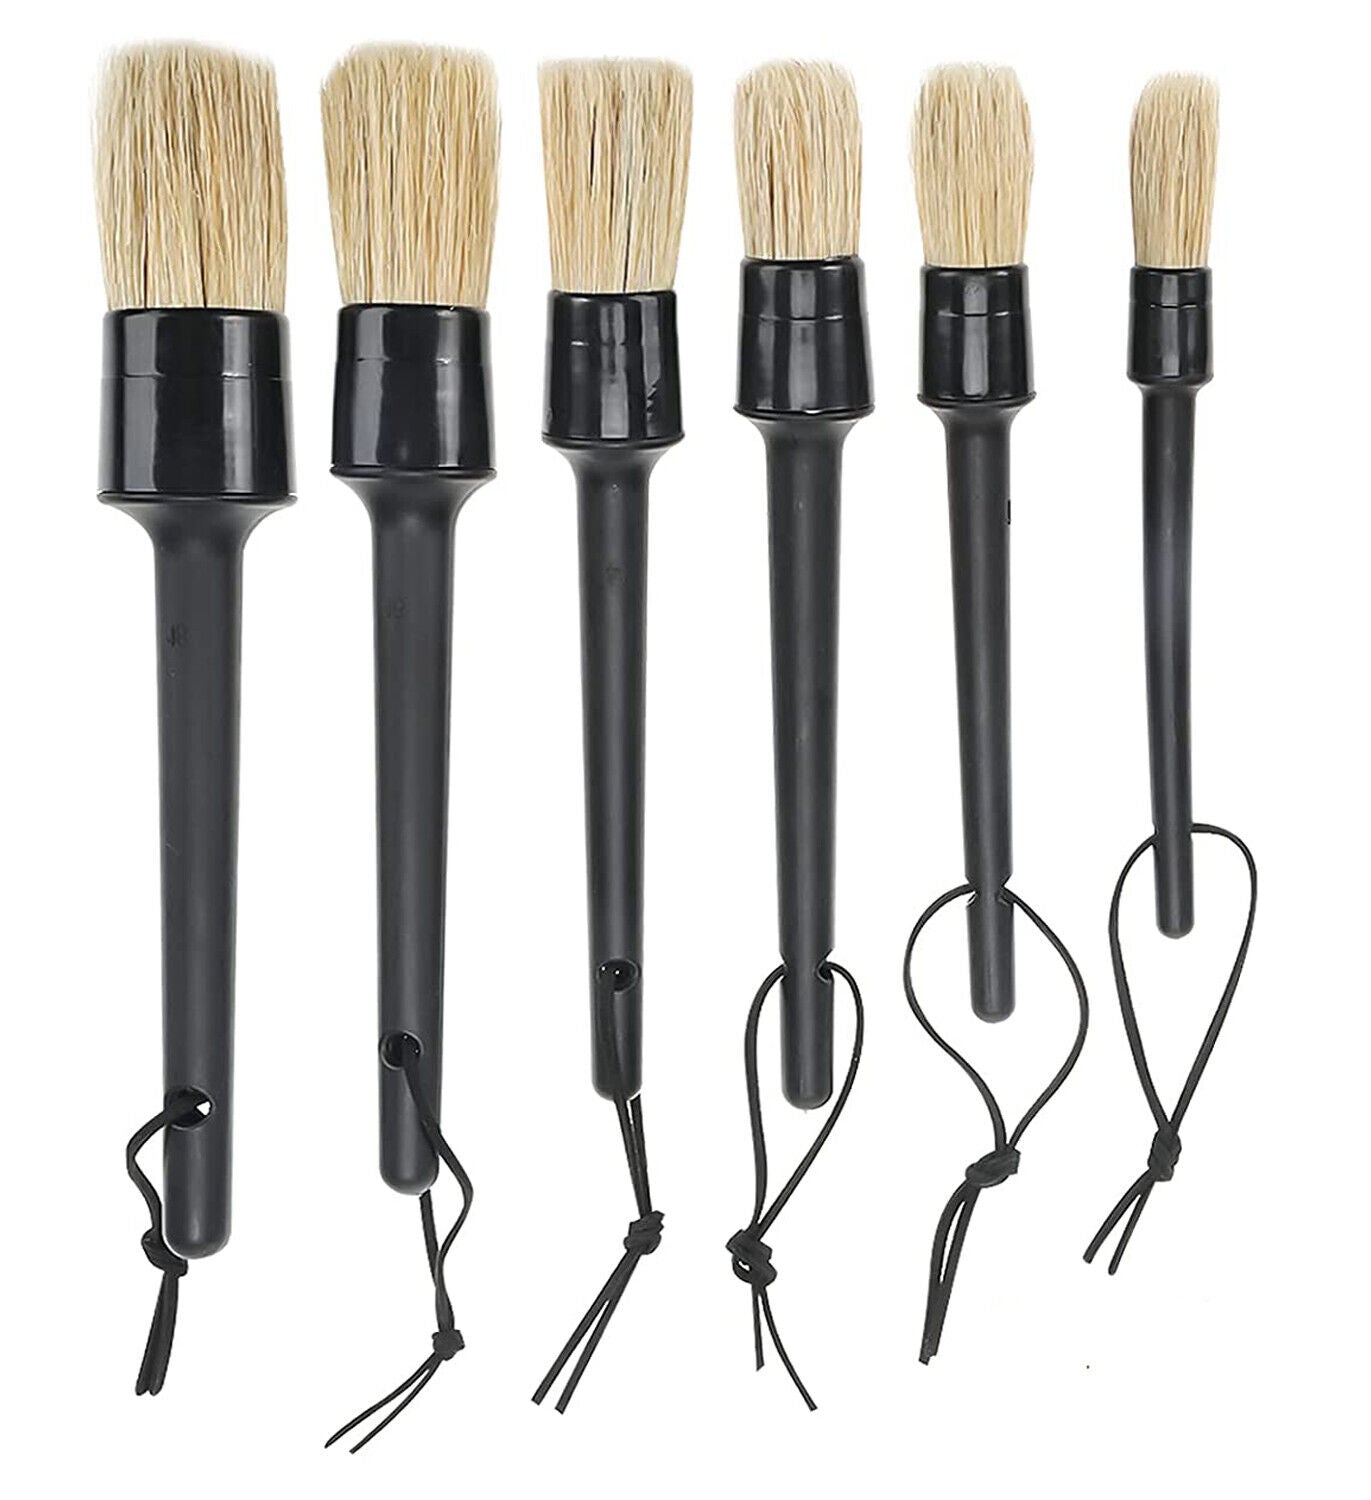 6 Pack Car Detailing Brush Set, Auto Detail Brushes Kit for Cleaning Car